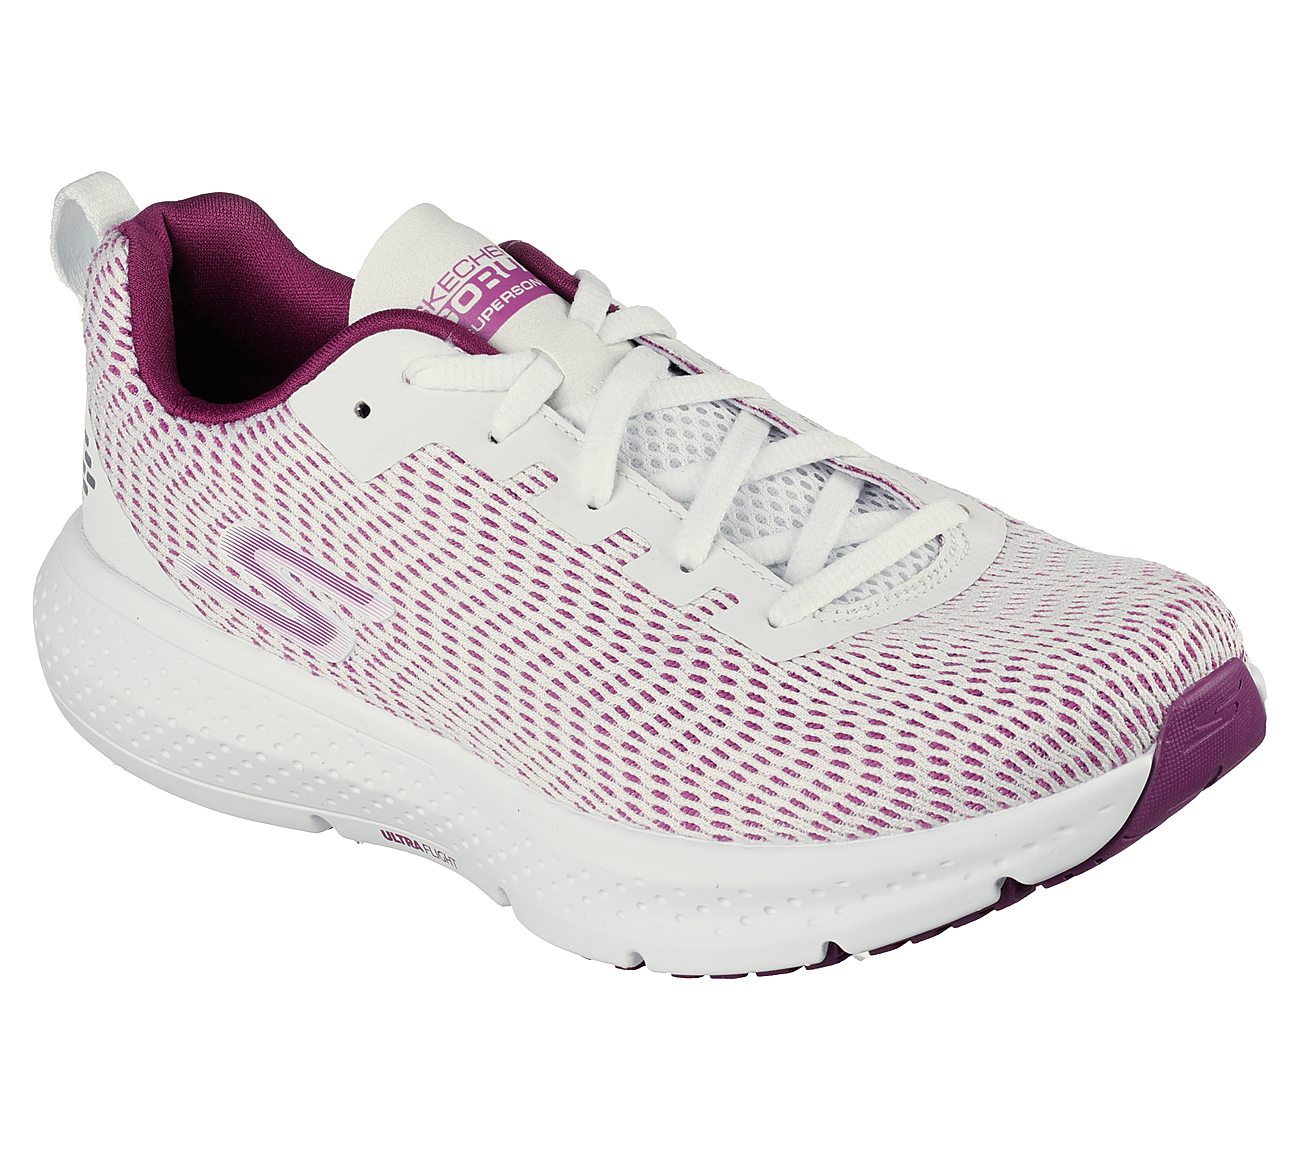 GO RUN SUPERSONIC, WWWHITE Footwear Lateral View